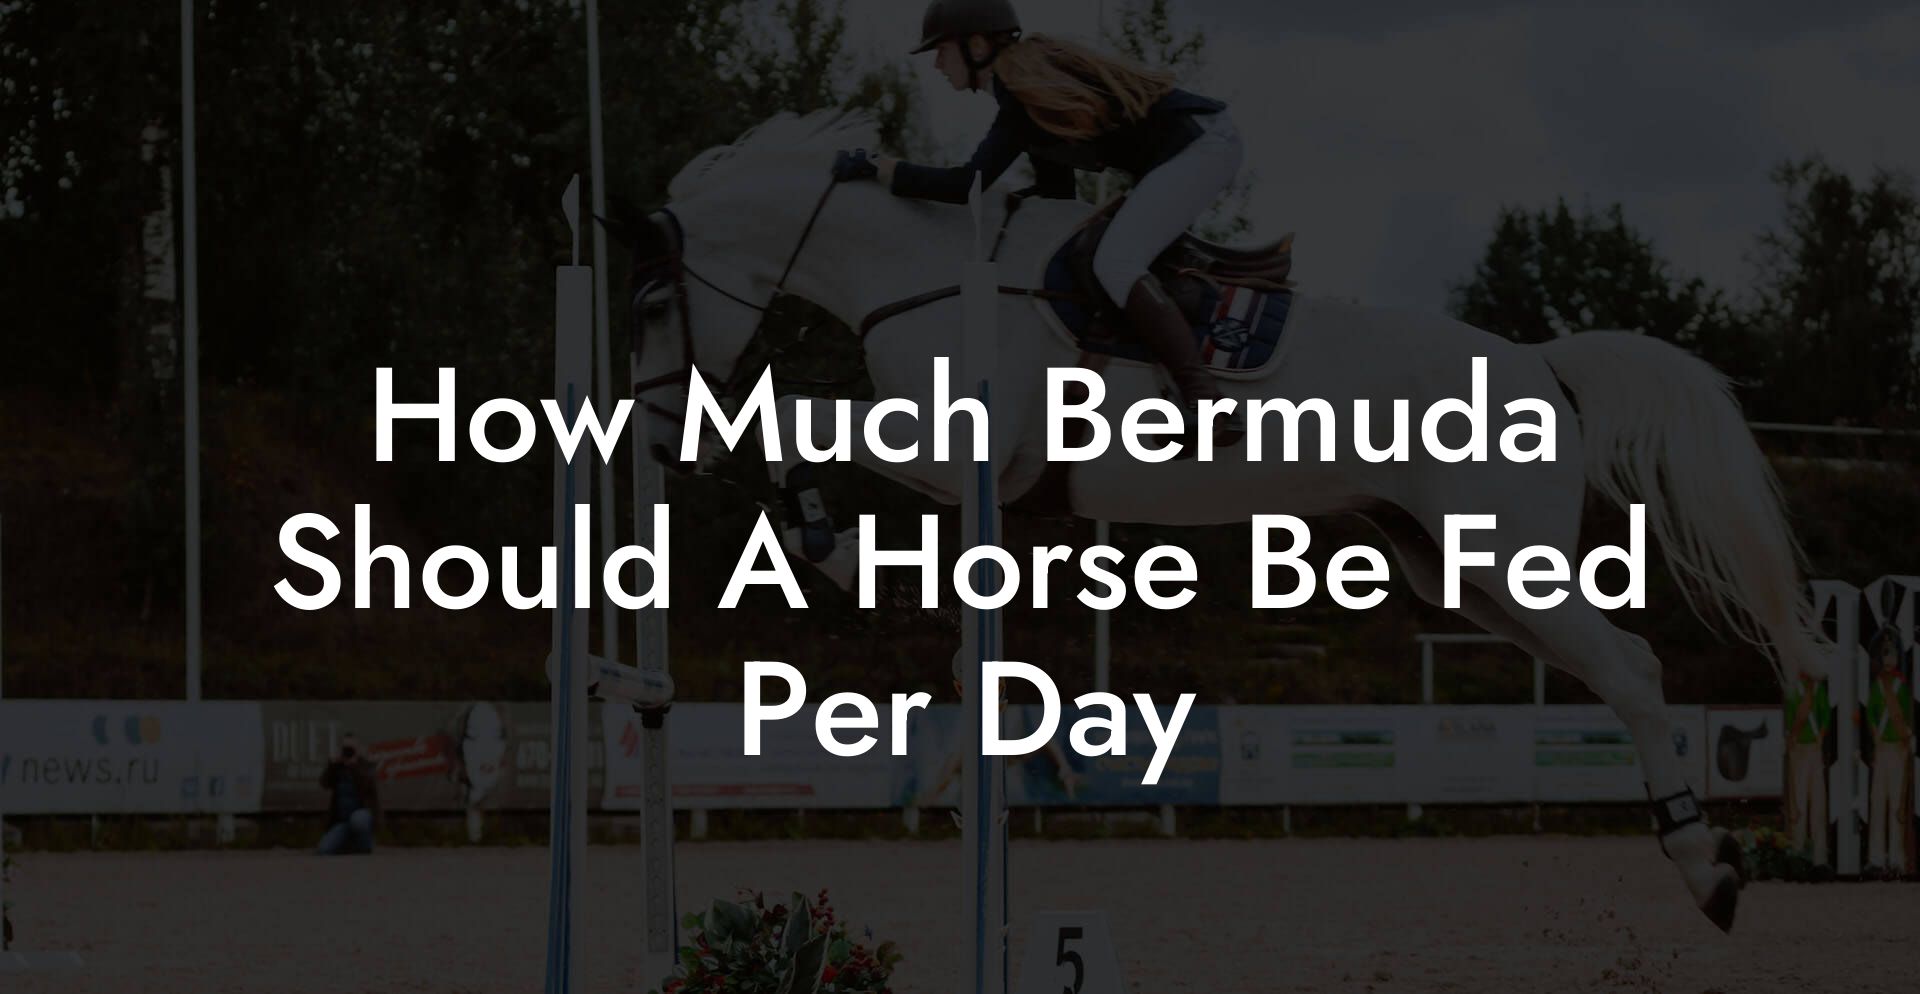 How Much Bermuda Should A Horse Be Fed Per Day